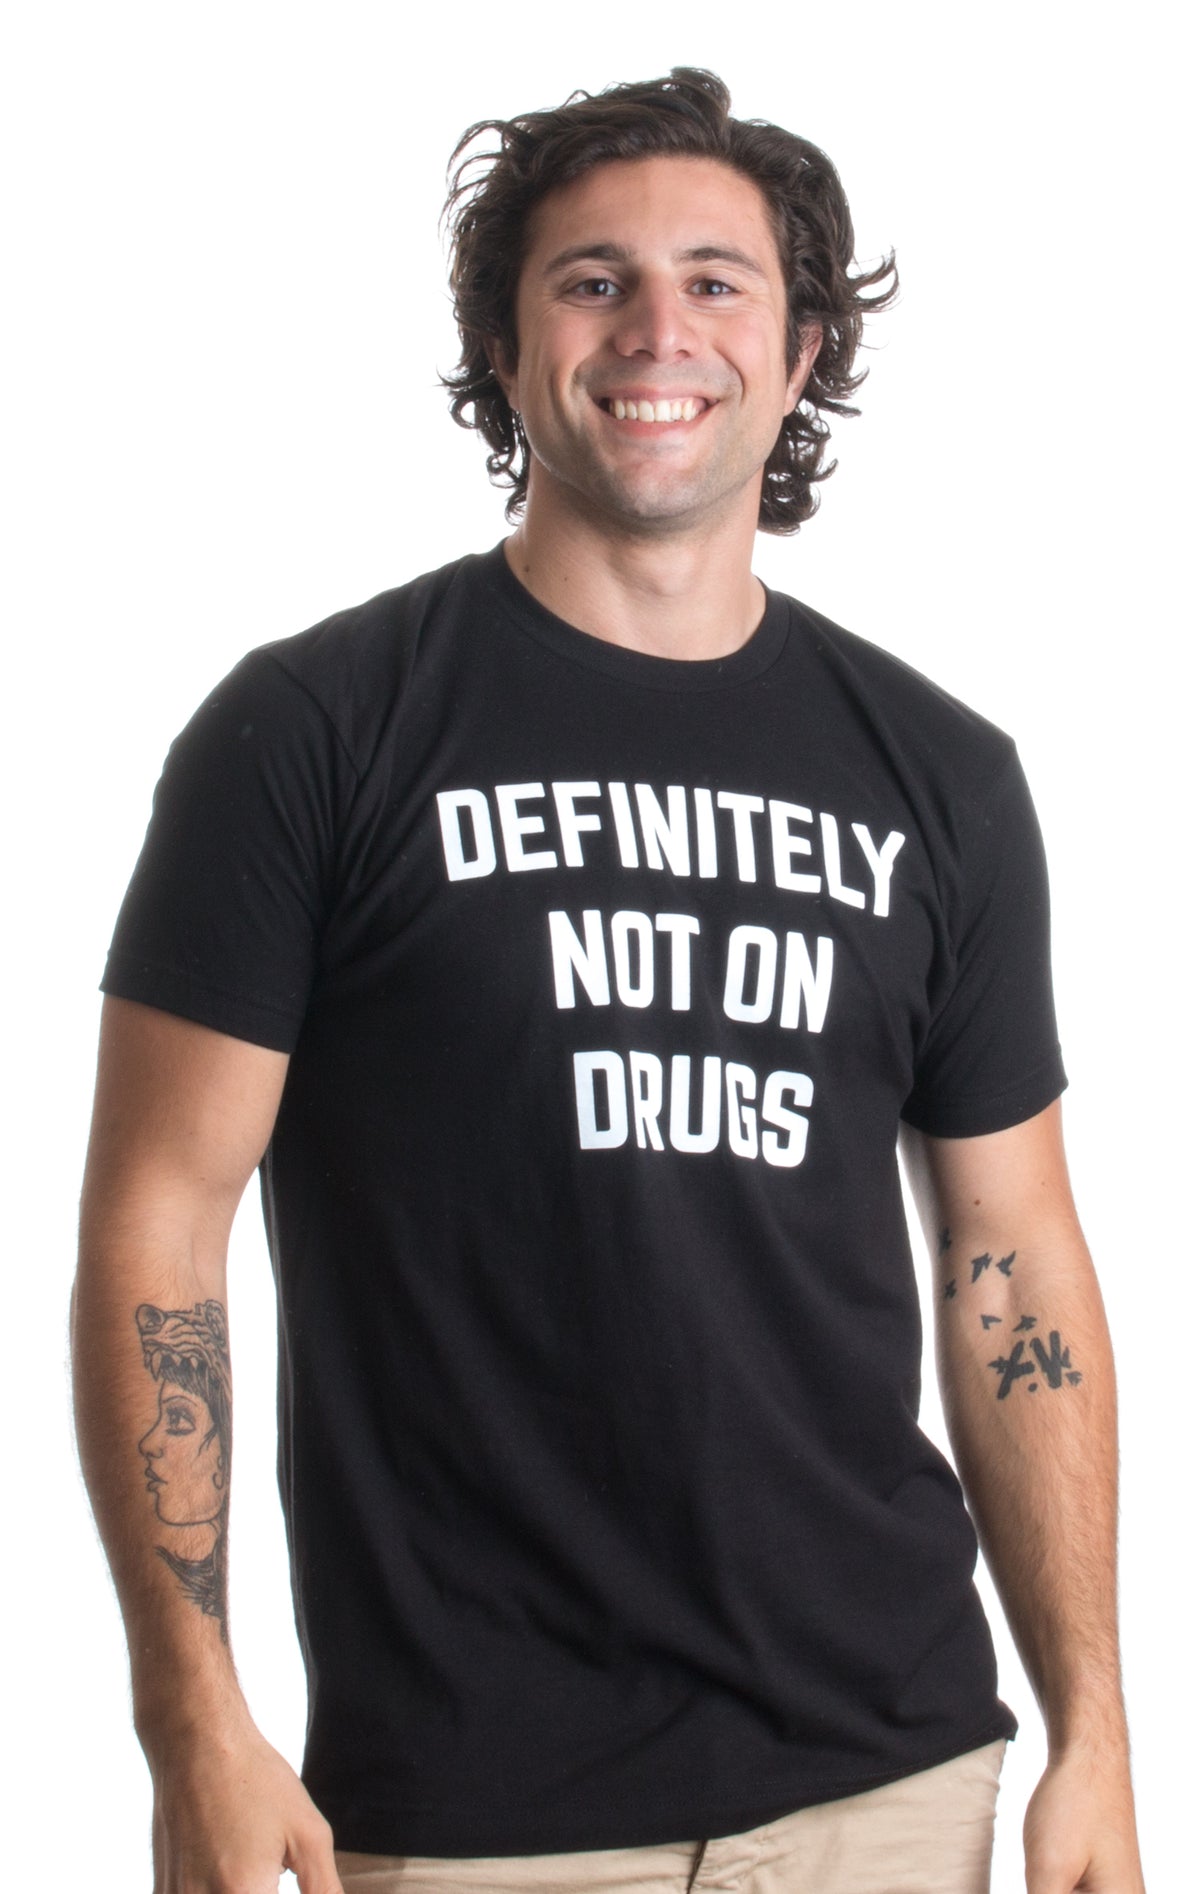 Definitely Not on Drugs | Funny Party, Rave, Festival Club Glow in Dark T-shirt